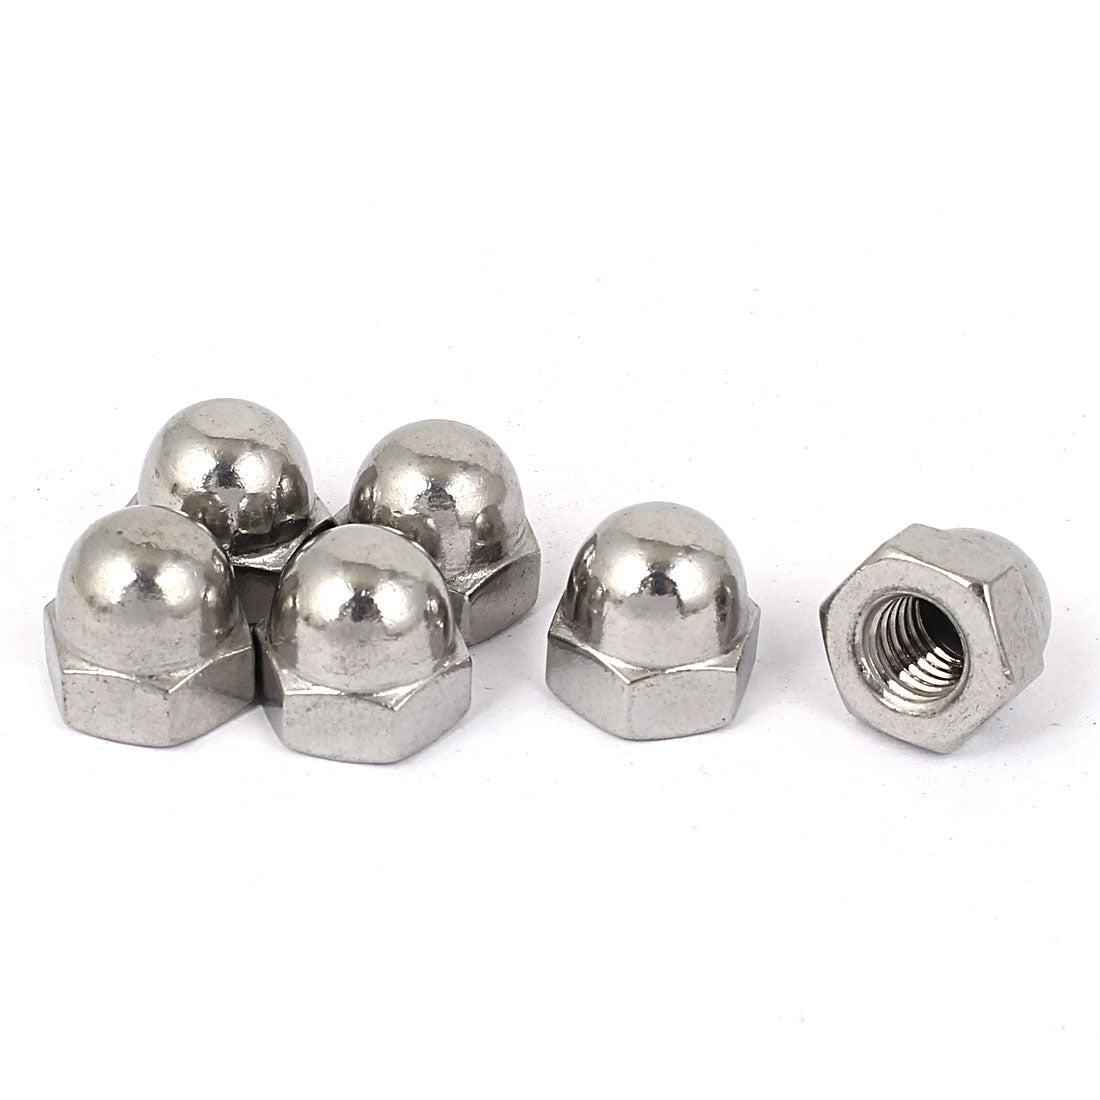 uxcell Uxcell 3/8" Thread Dia Dome Head Stainless Steel Cap Acorn Hex Nuts 6pcs